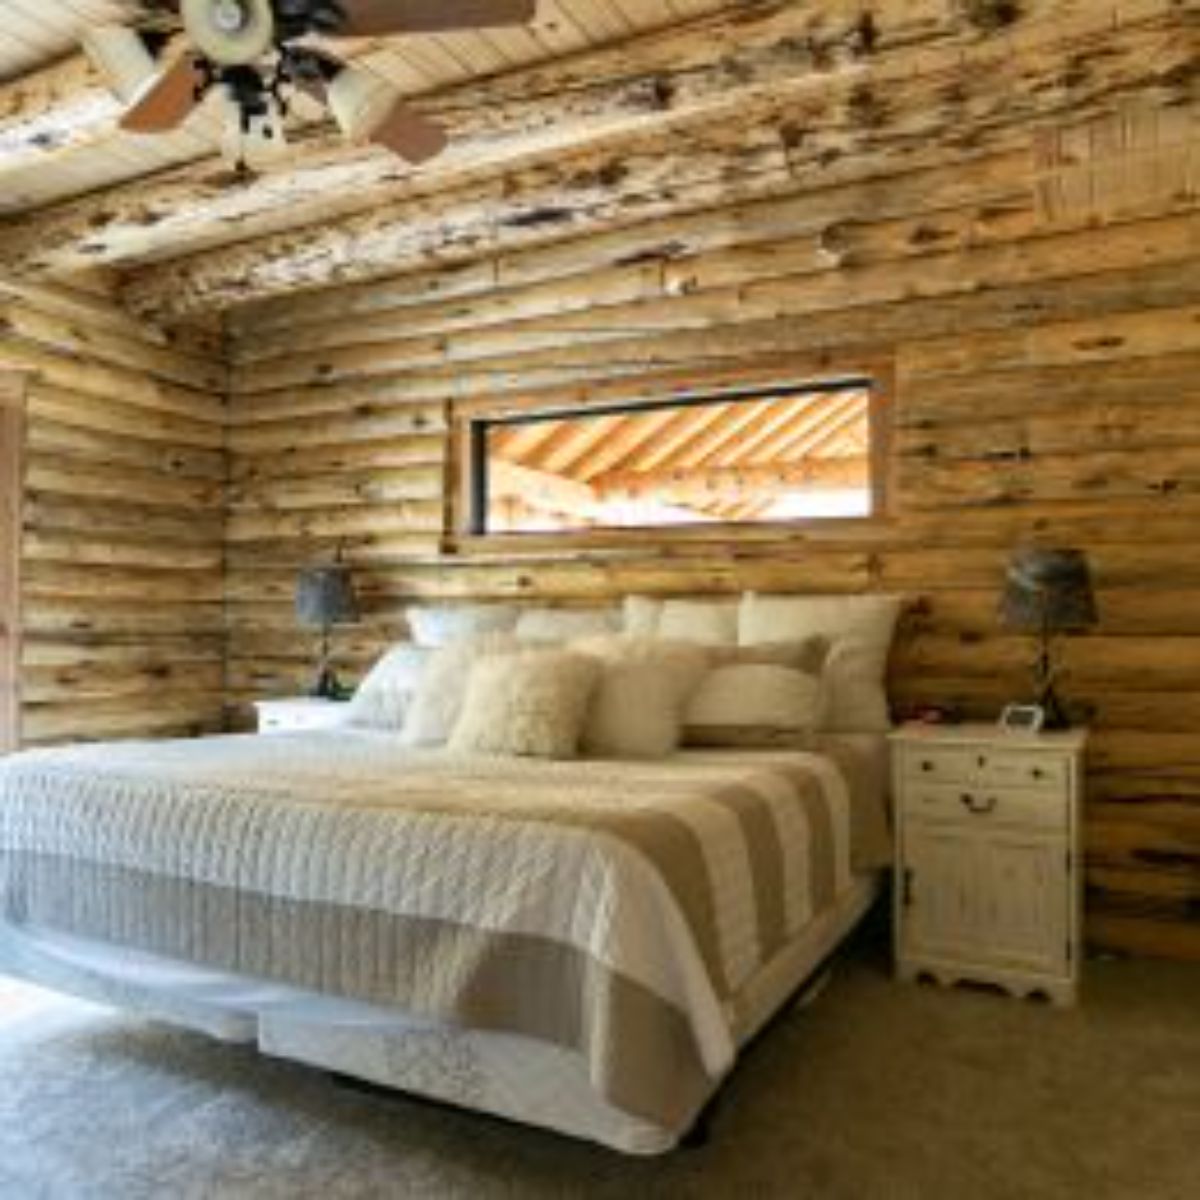 light bedding on bed against log cabin wall with long rectangular window above bed